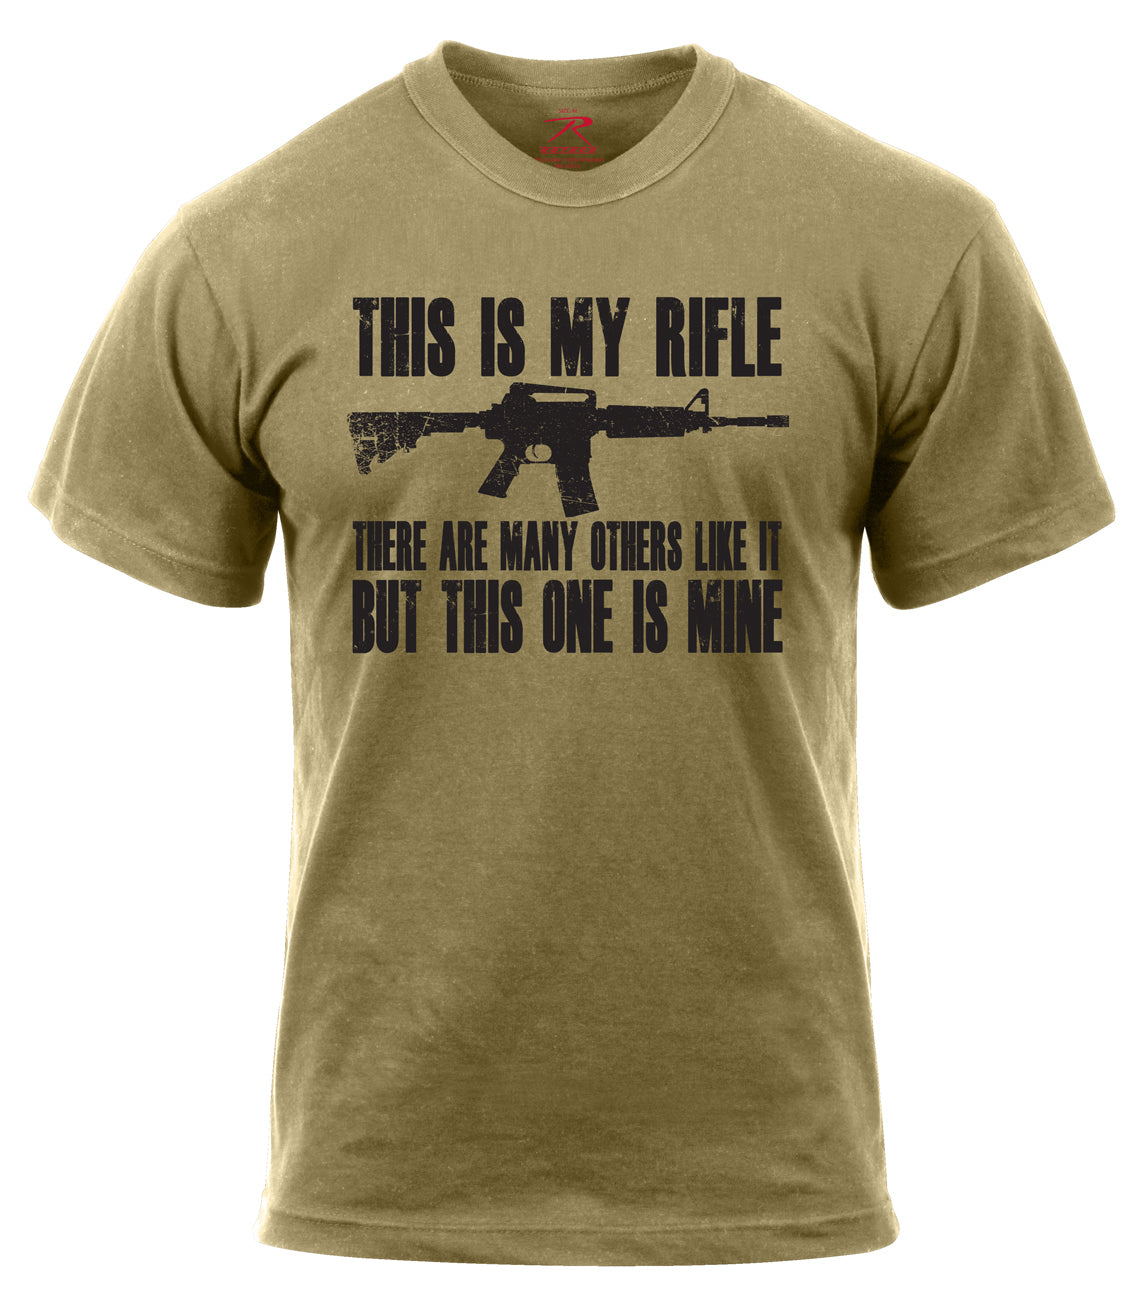 "This Is My Rifle" T-Shirt